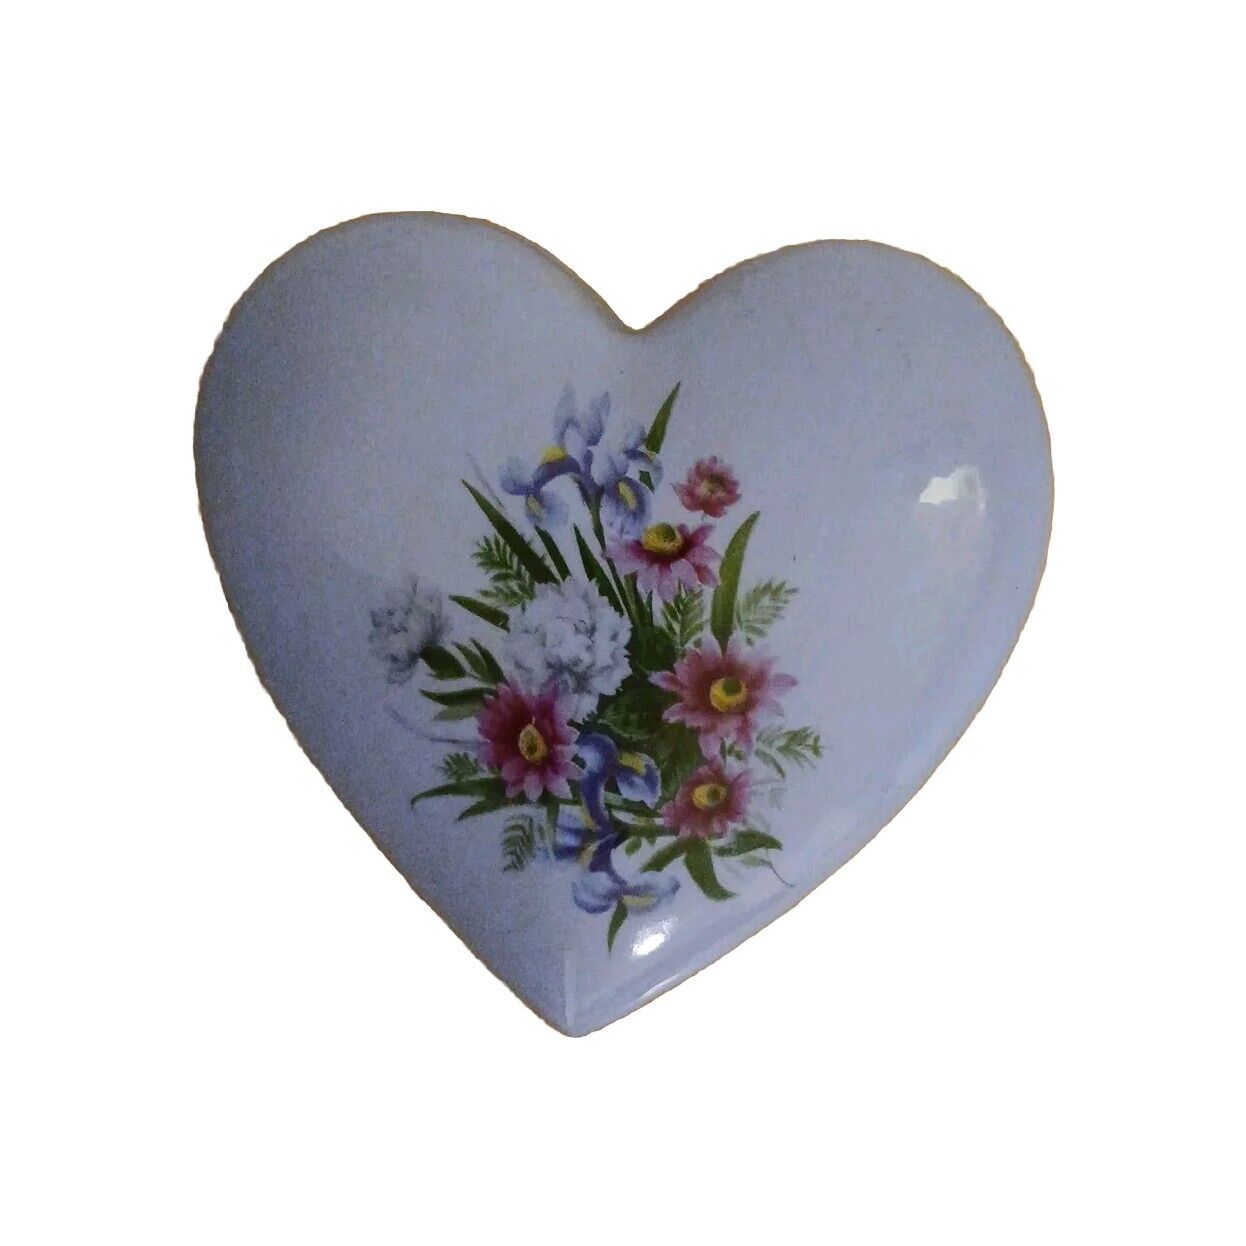 Vintage Blue Heart Shaped Trinket Box with Flowers Ceramic 